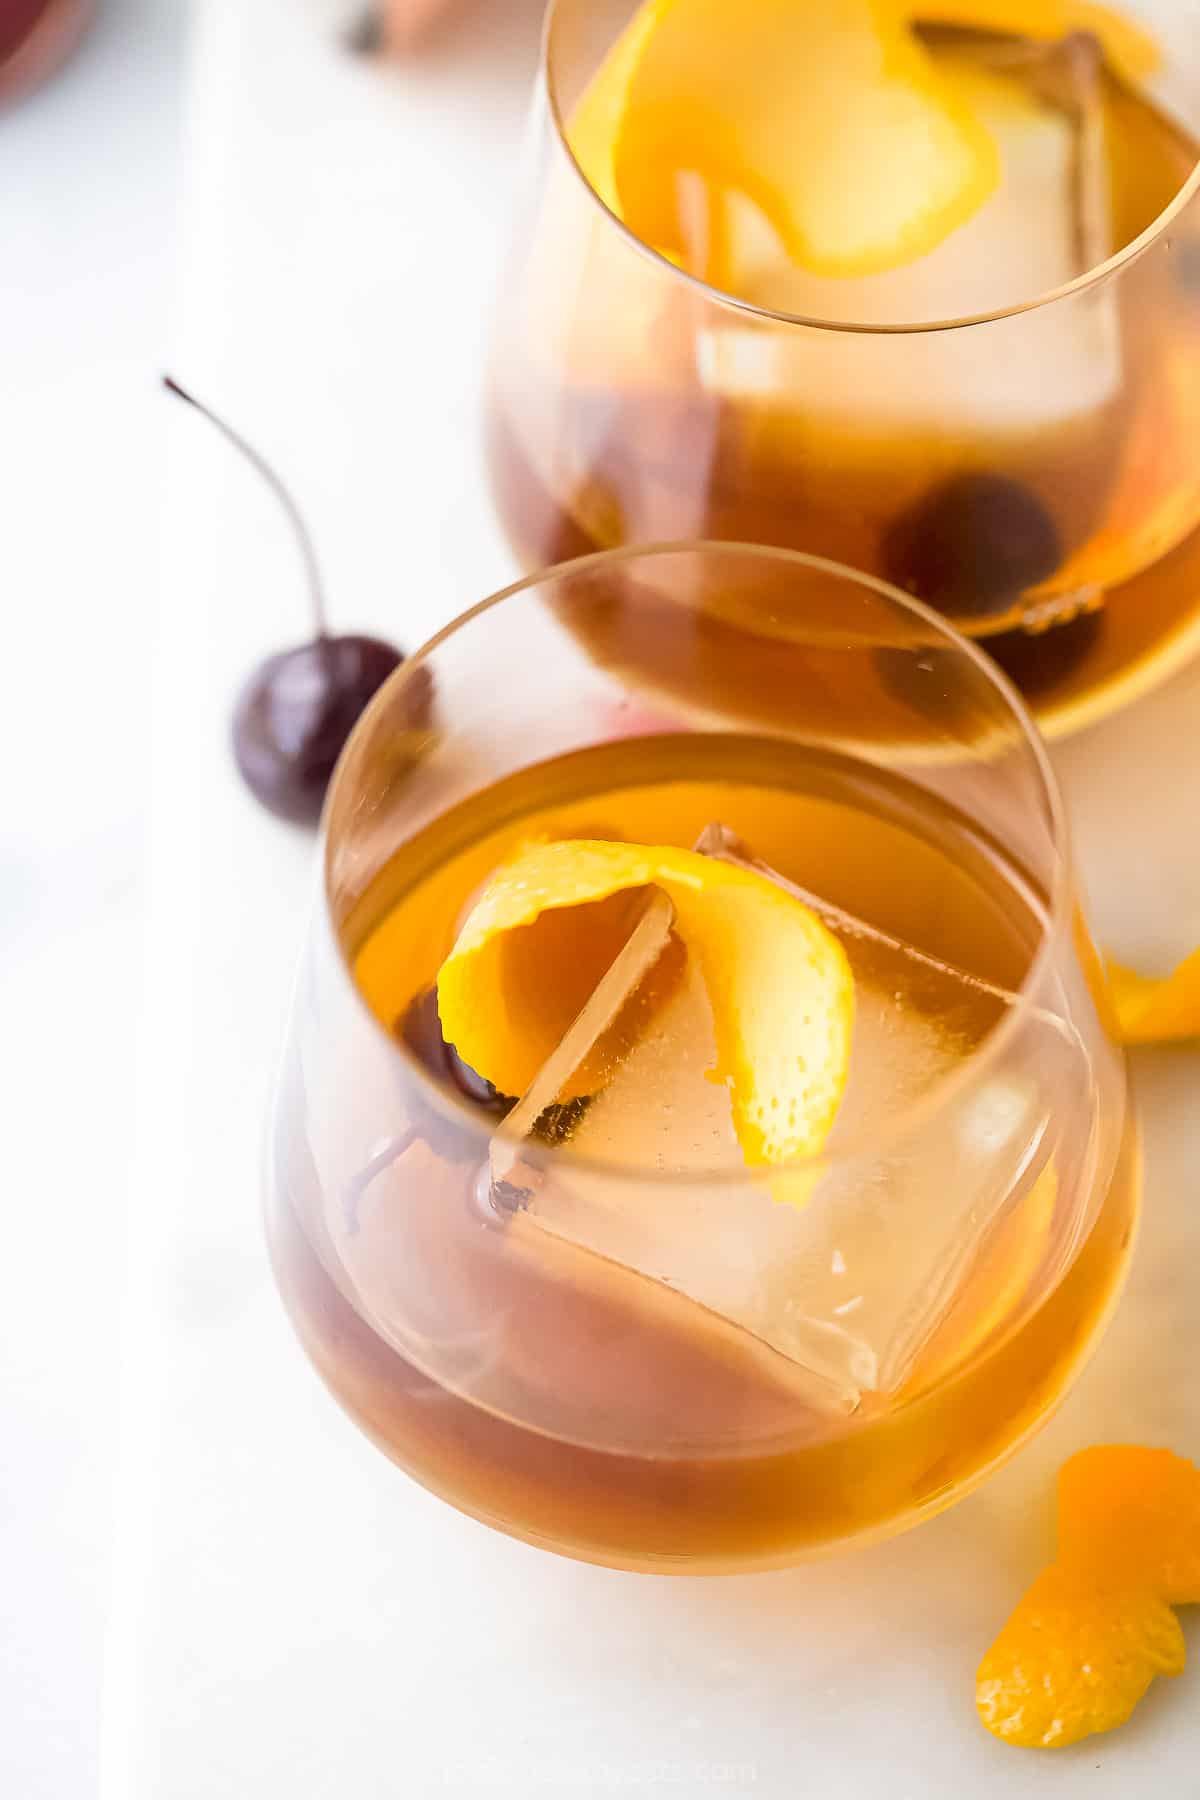 A close-up shot of a maple bourbon mixed drink in a glass with a cherry and an orange peel